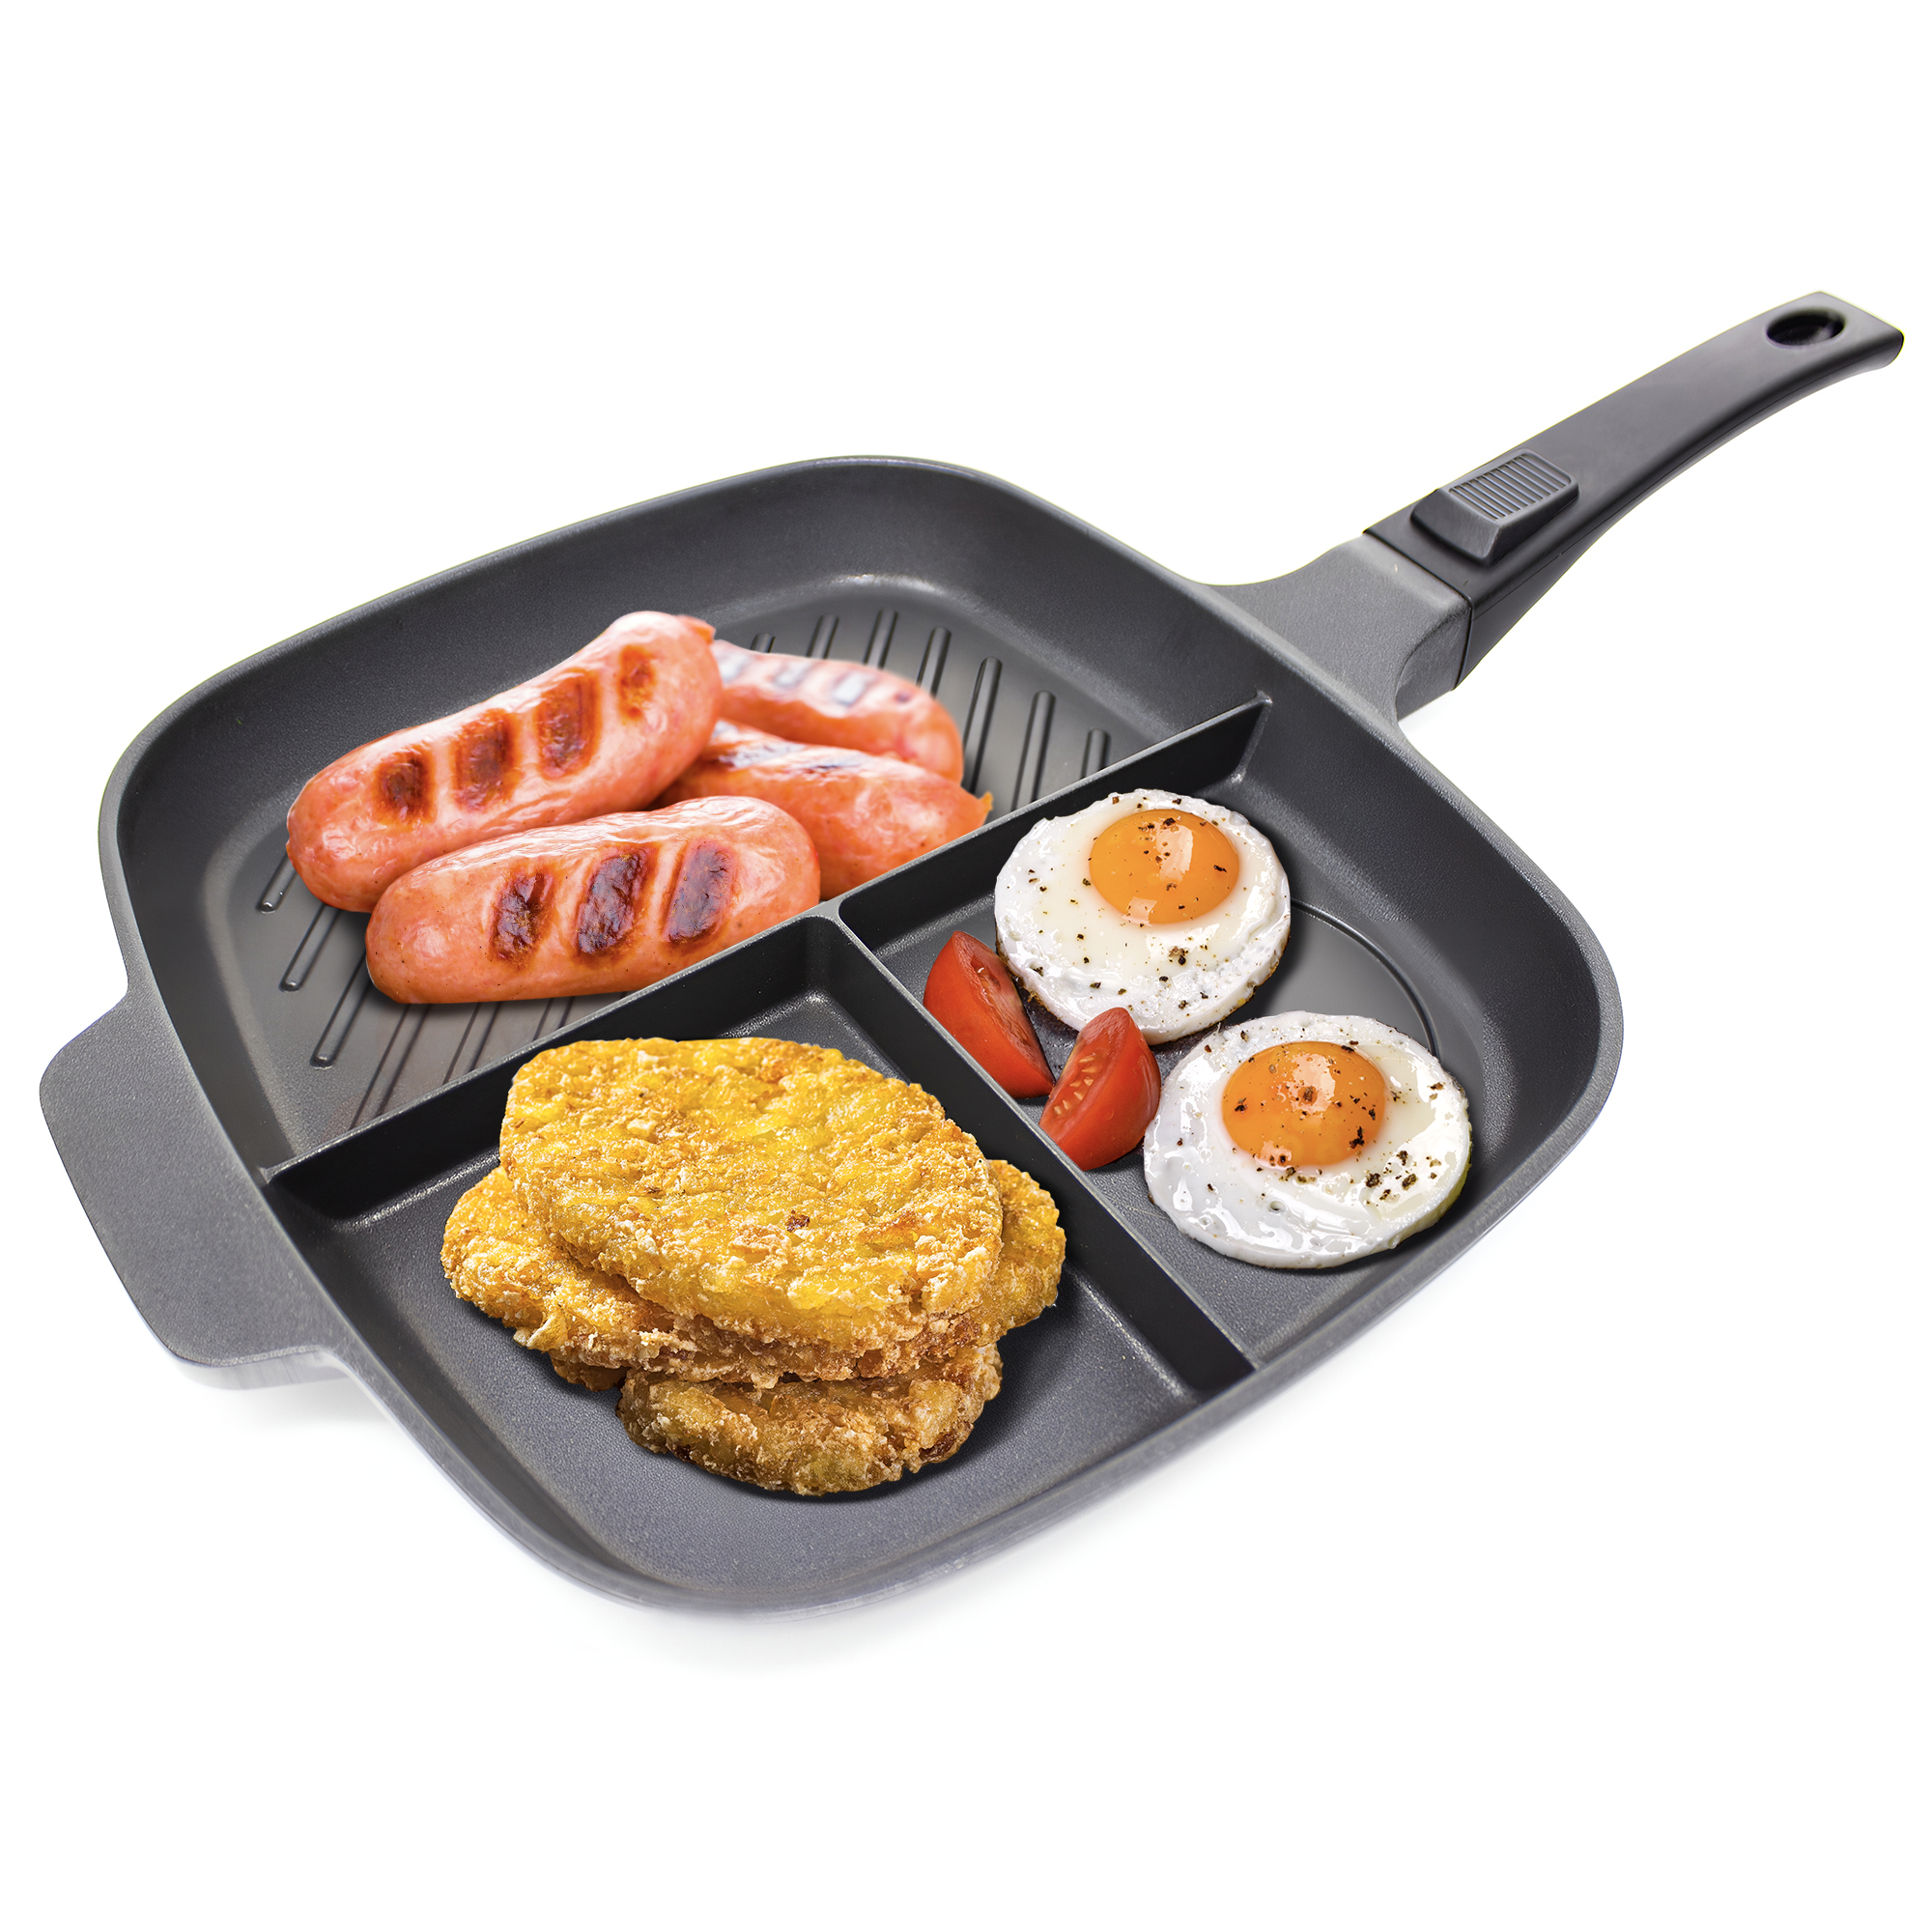 The Whatever Pan - Cast Aluminium Griddle Pan with Glass Lid by Jean  Patrique